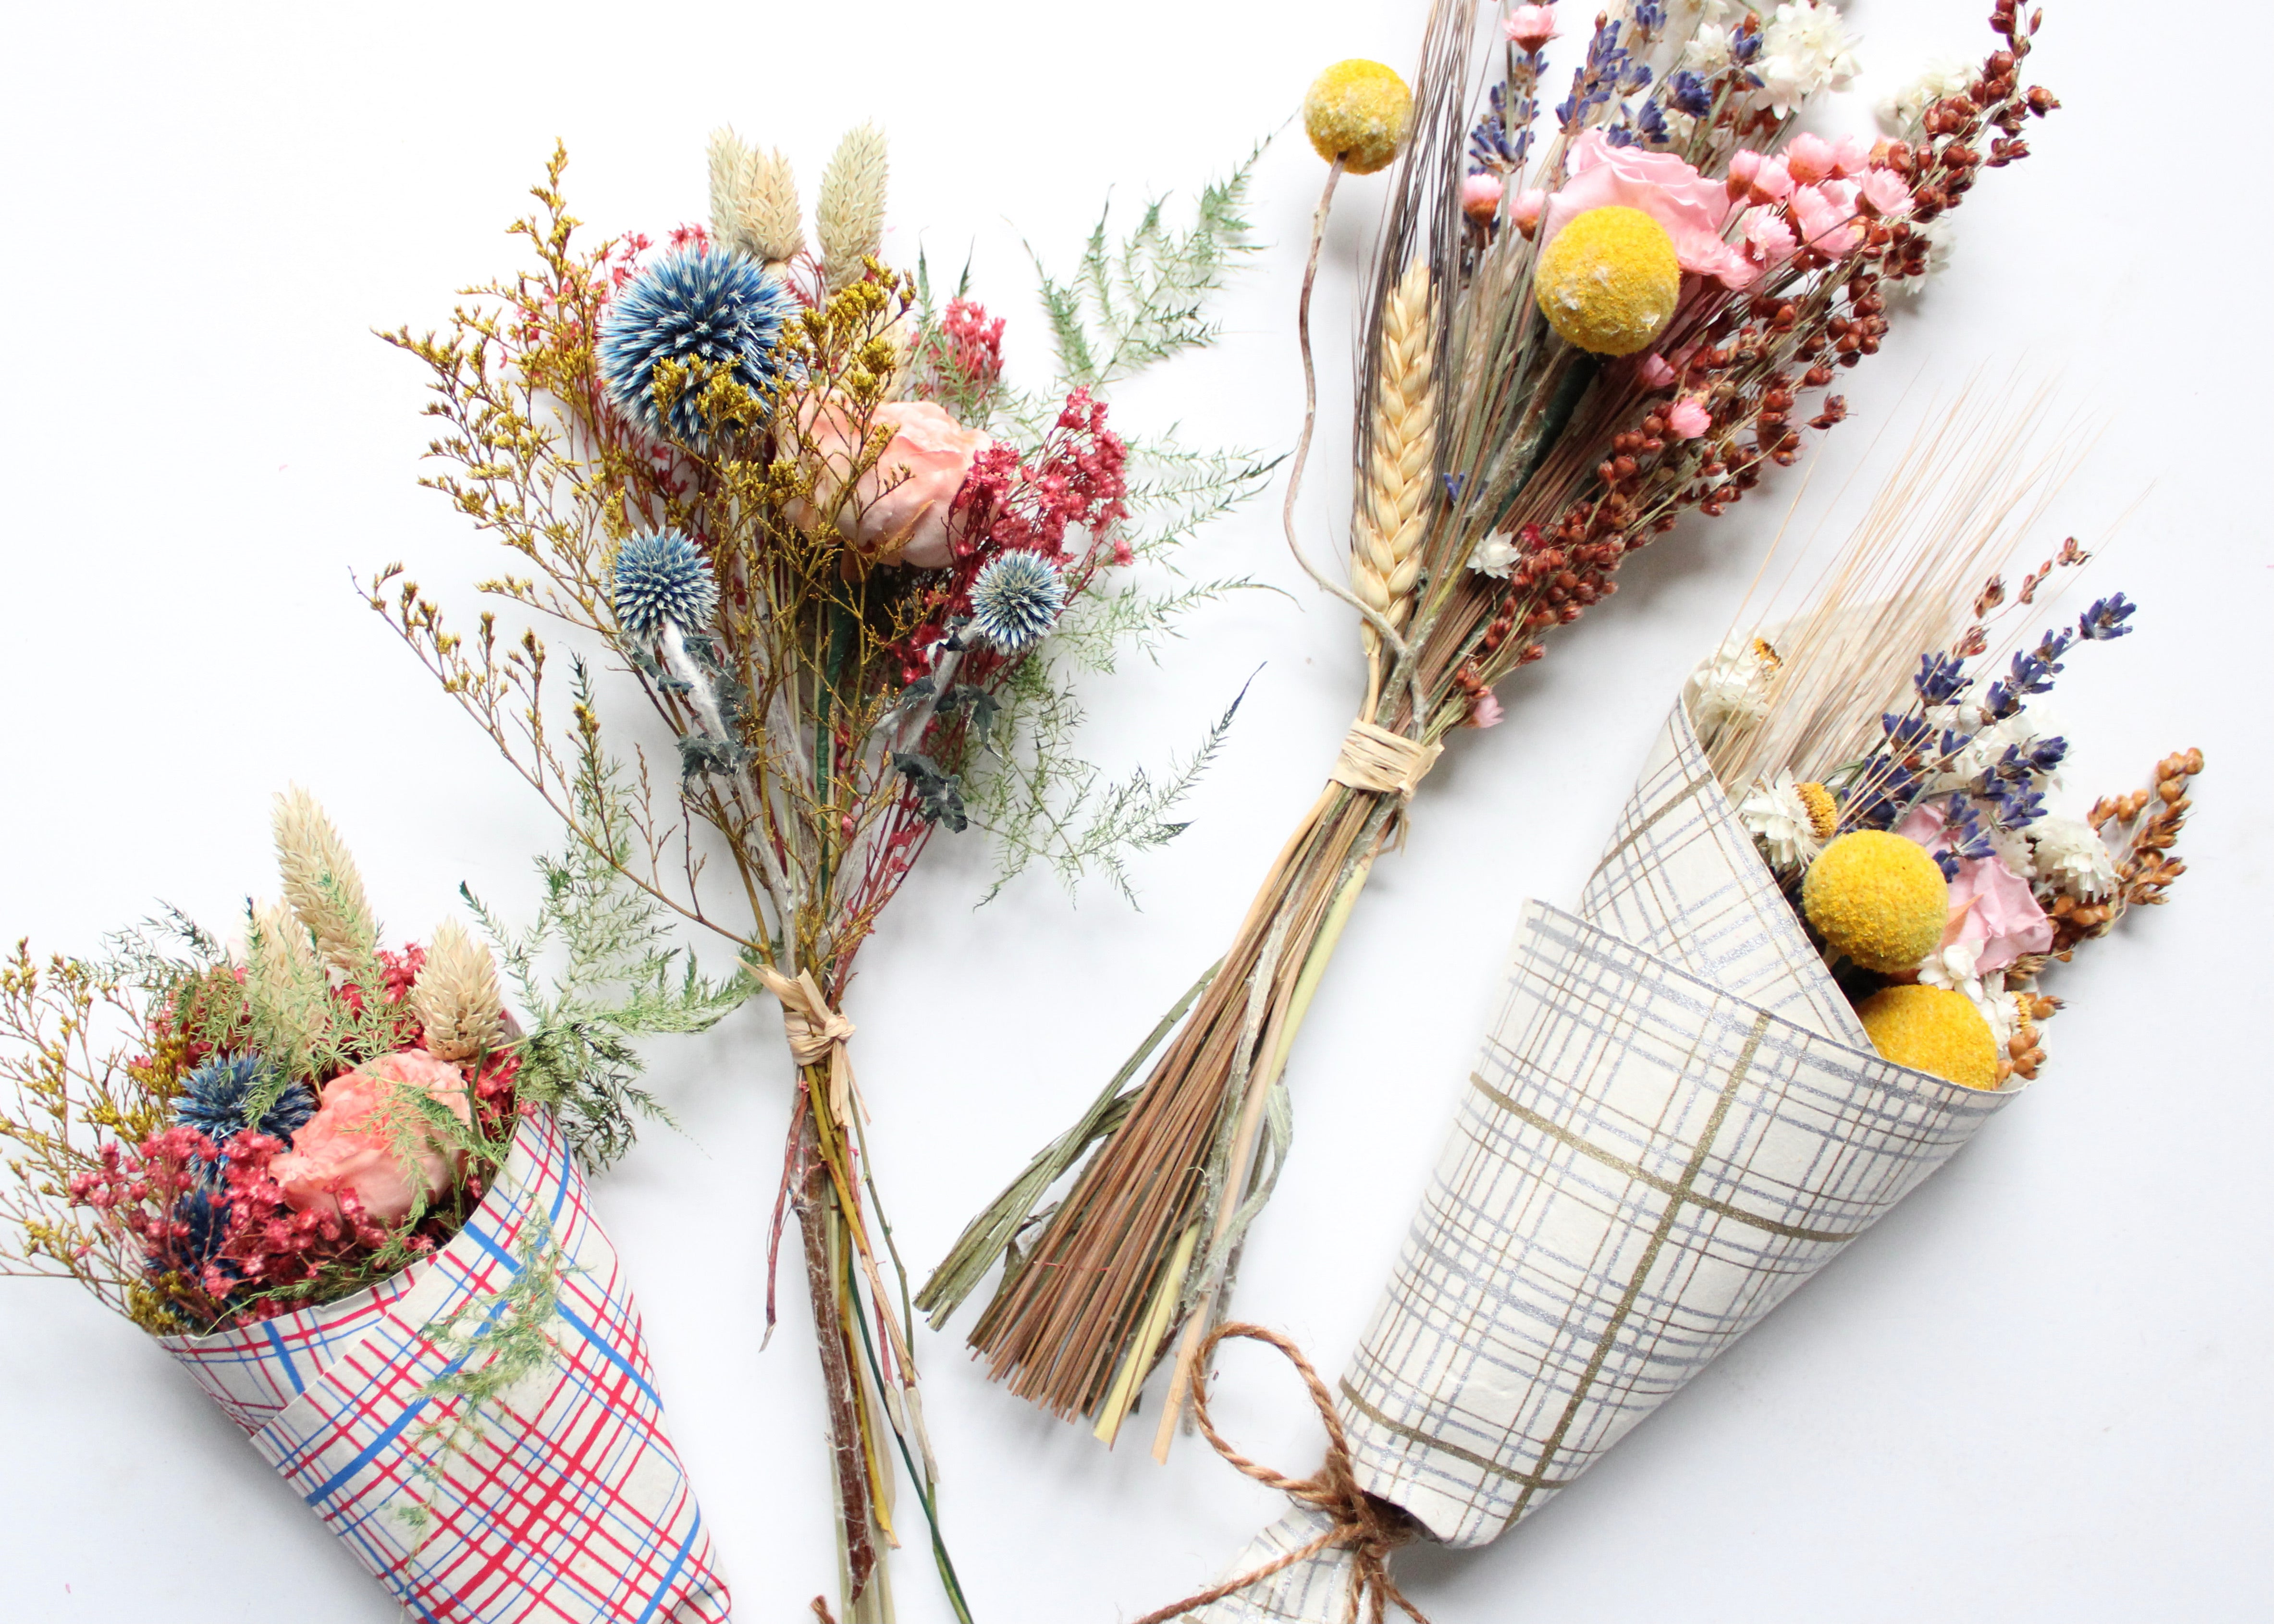 3 Reasons Why You Should Send a Dried Floral Bouquet